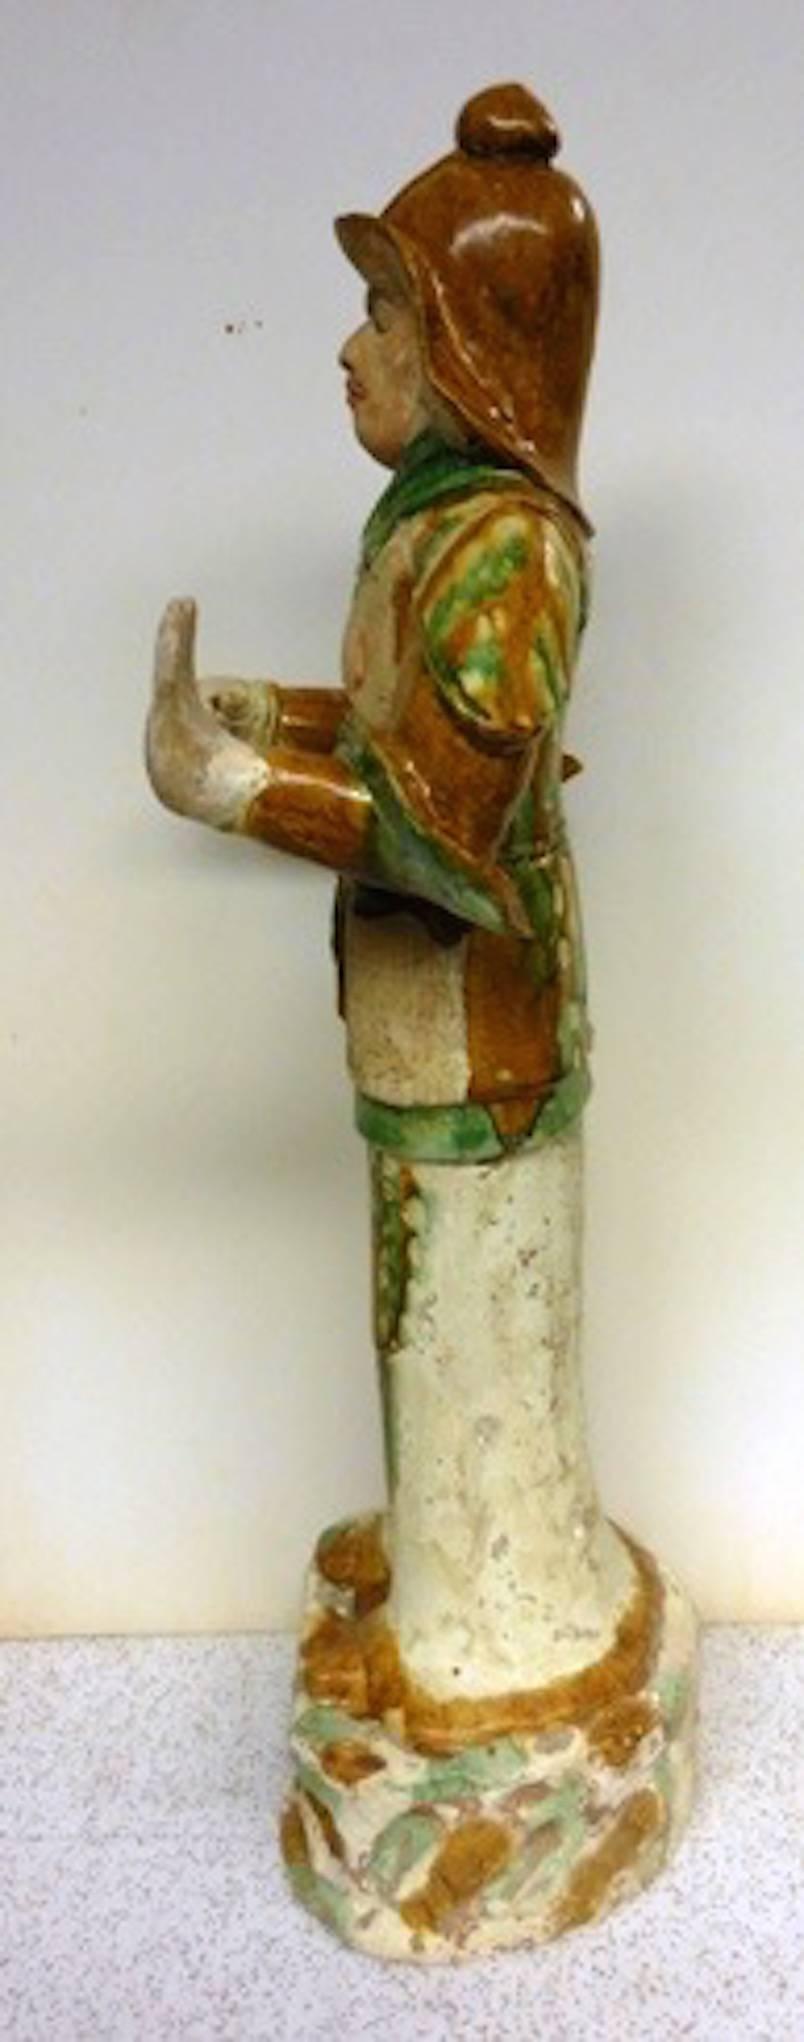 
A Tang Dynasty Guardian official with Sancai Glazes. The three colored glazed figures are prized objects, and only the very top officials of the Tang Dynasty were given access and privilege to have these made.
The figure is dressed in body armour